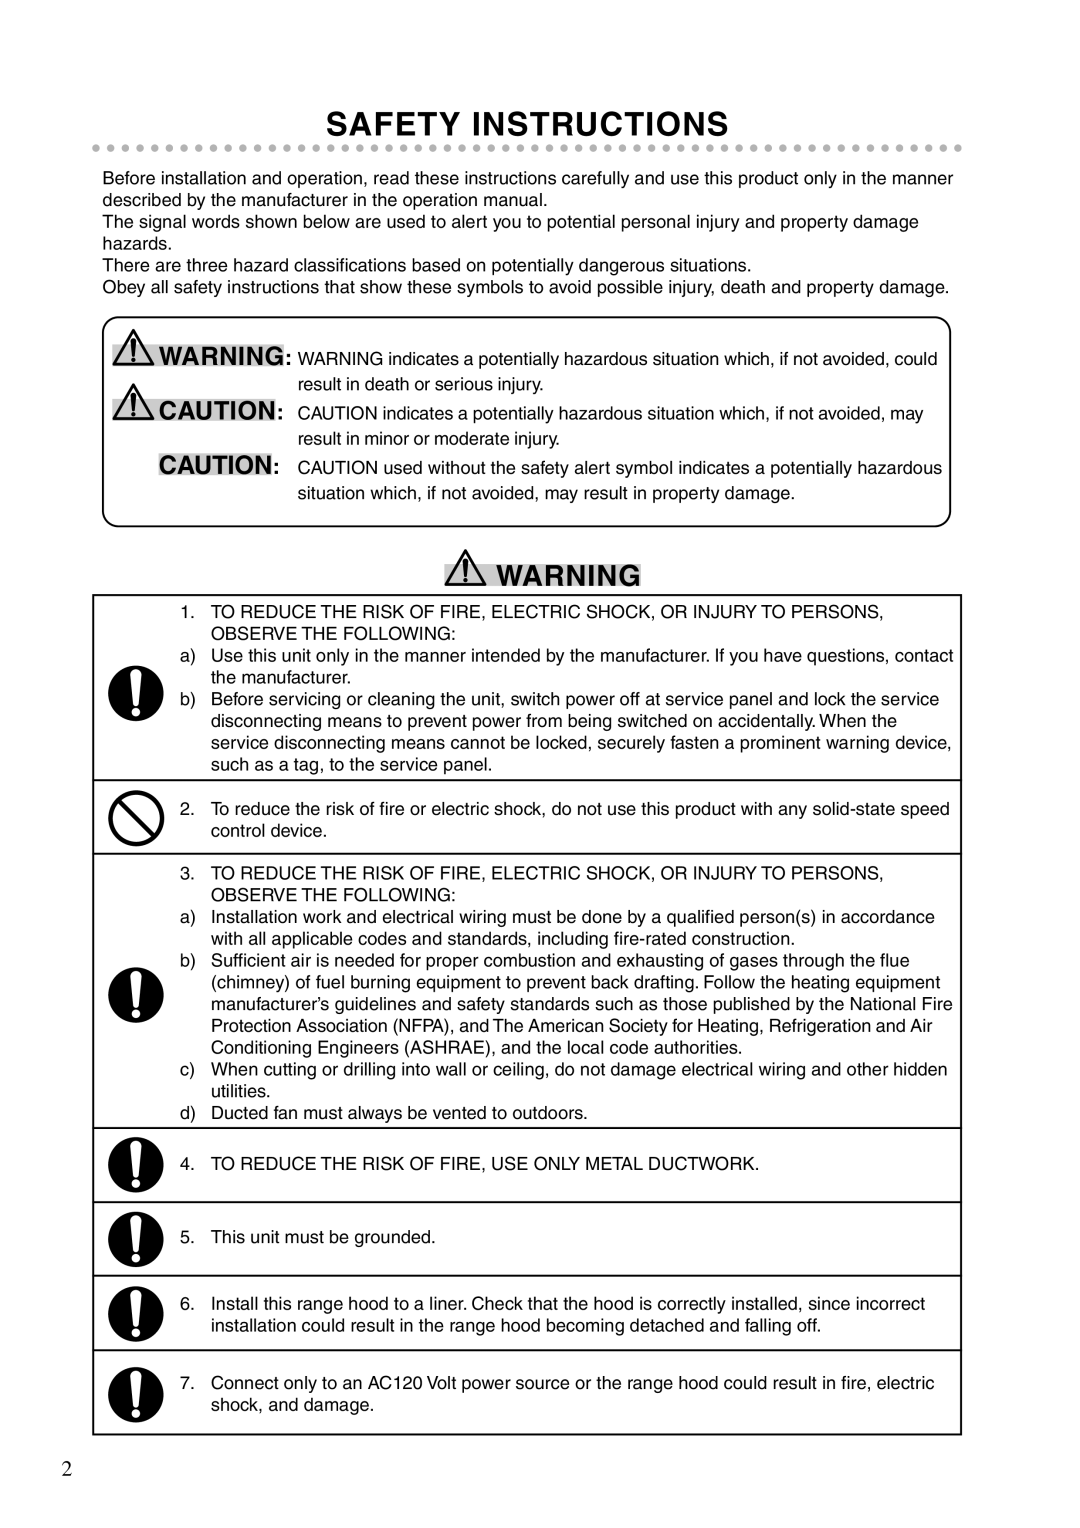 Fujioh BUF-02, BUF-01 installation manual Safety Instructions, Caution Caution 